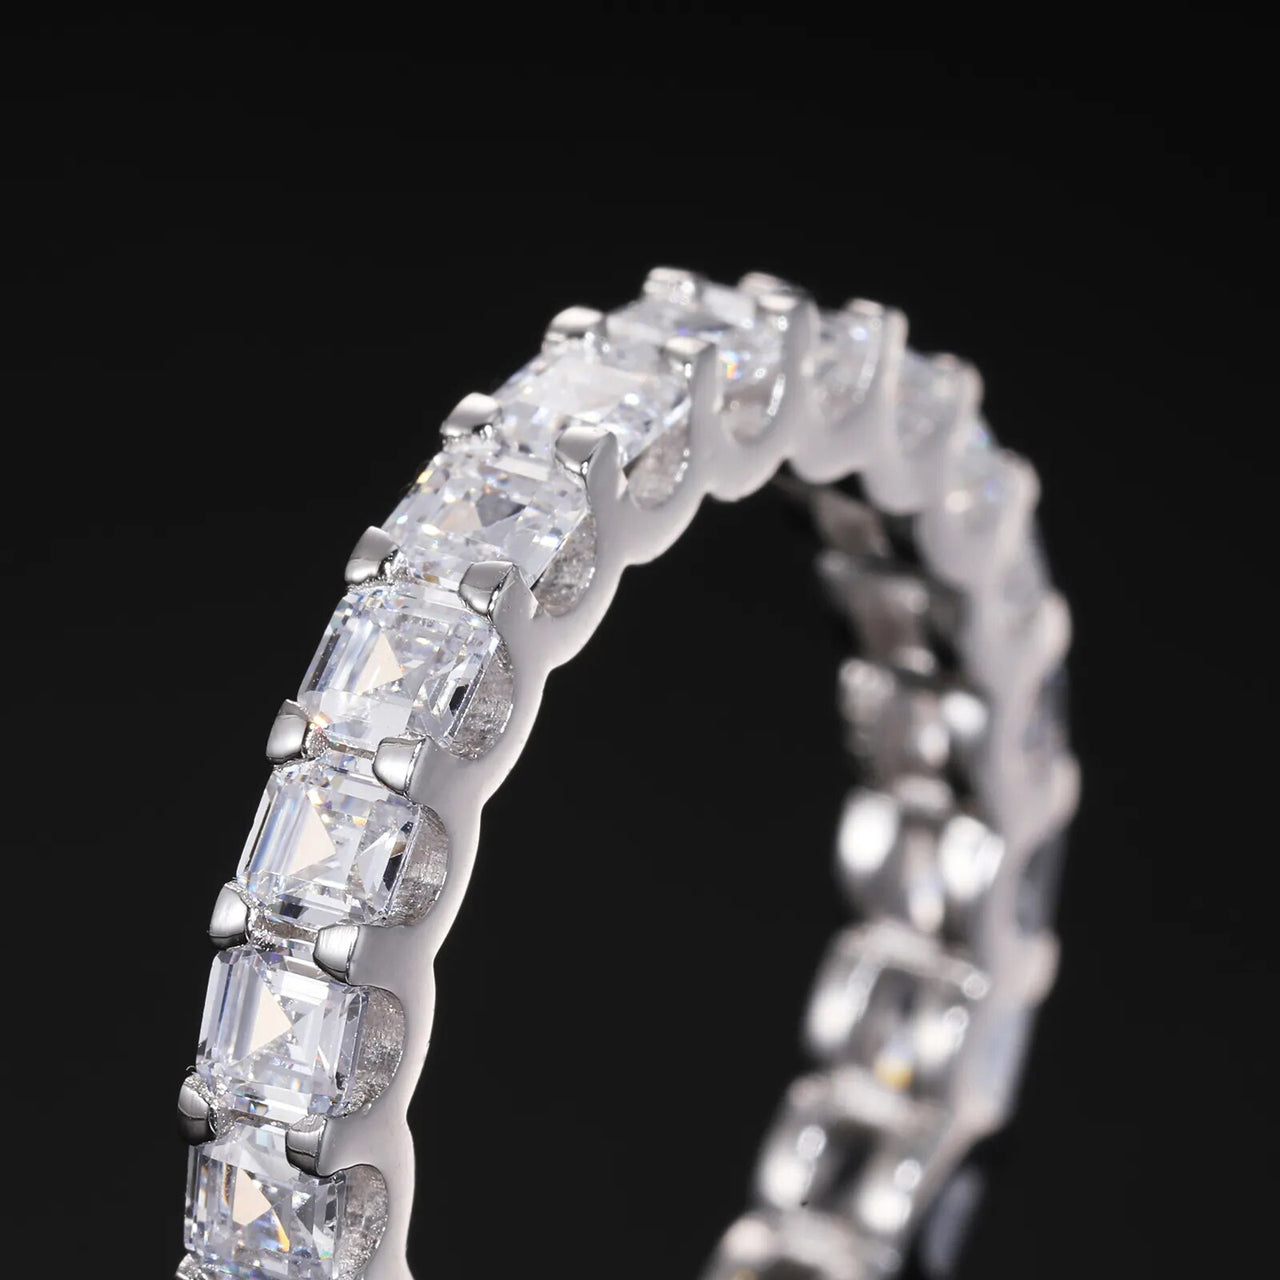 Thin S925 Moissanite Eternity Band Ring - Different Drips